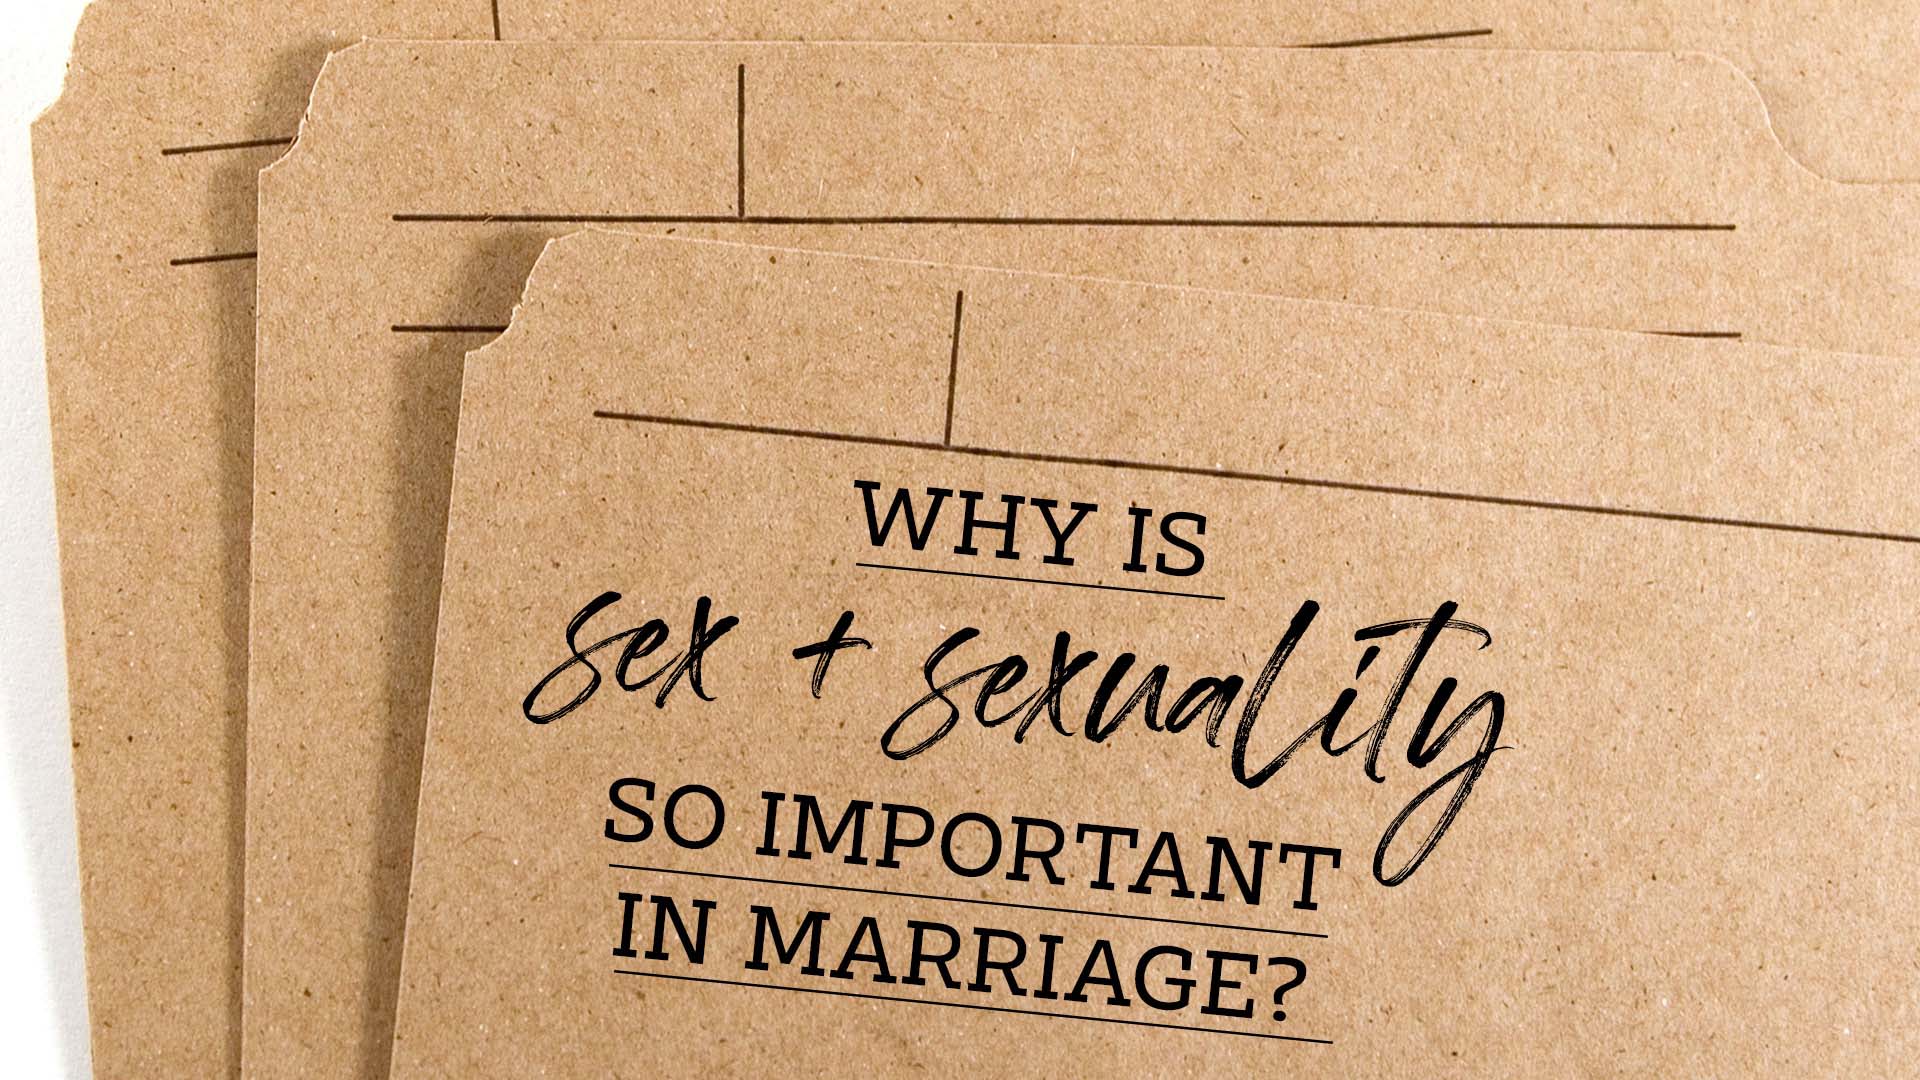 Why Is Sex & Sexuality So Important In Marriage?